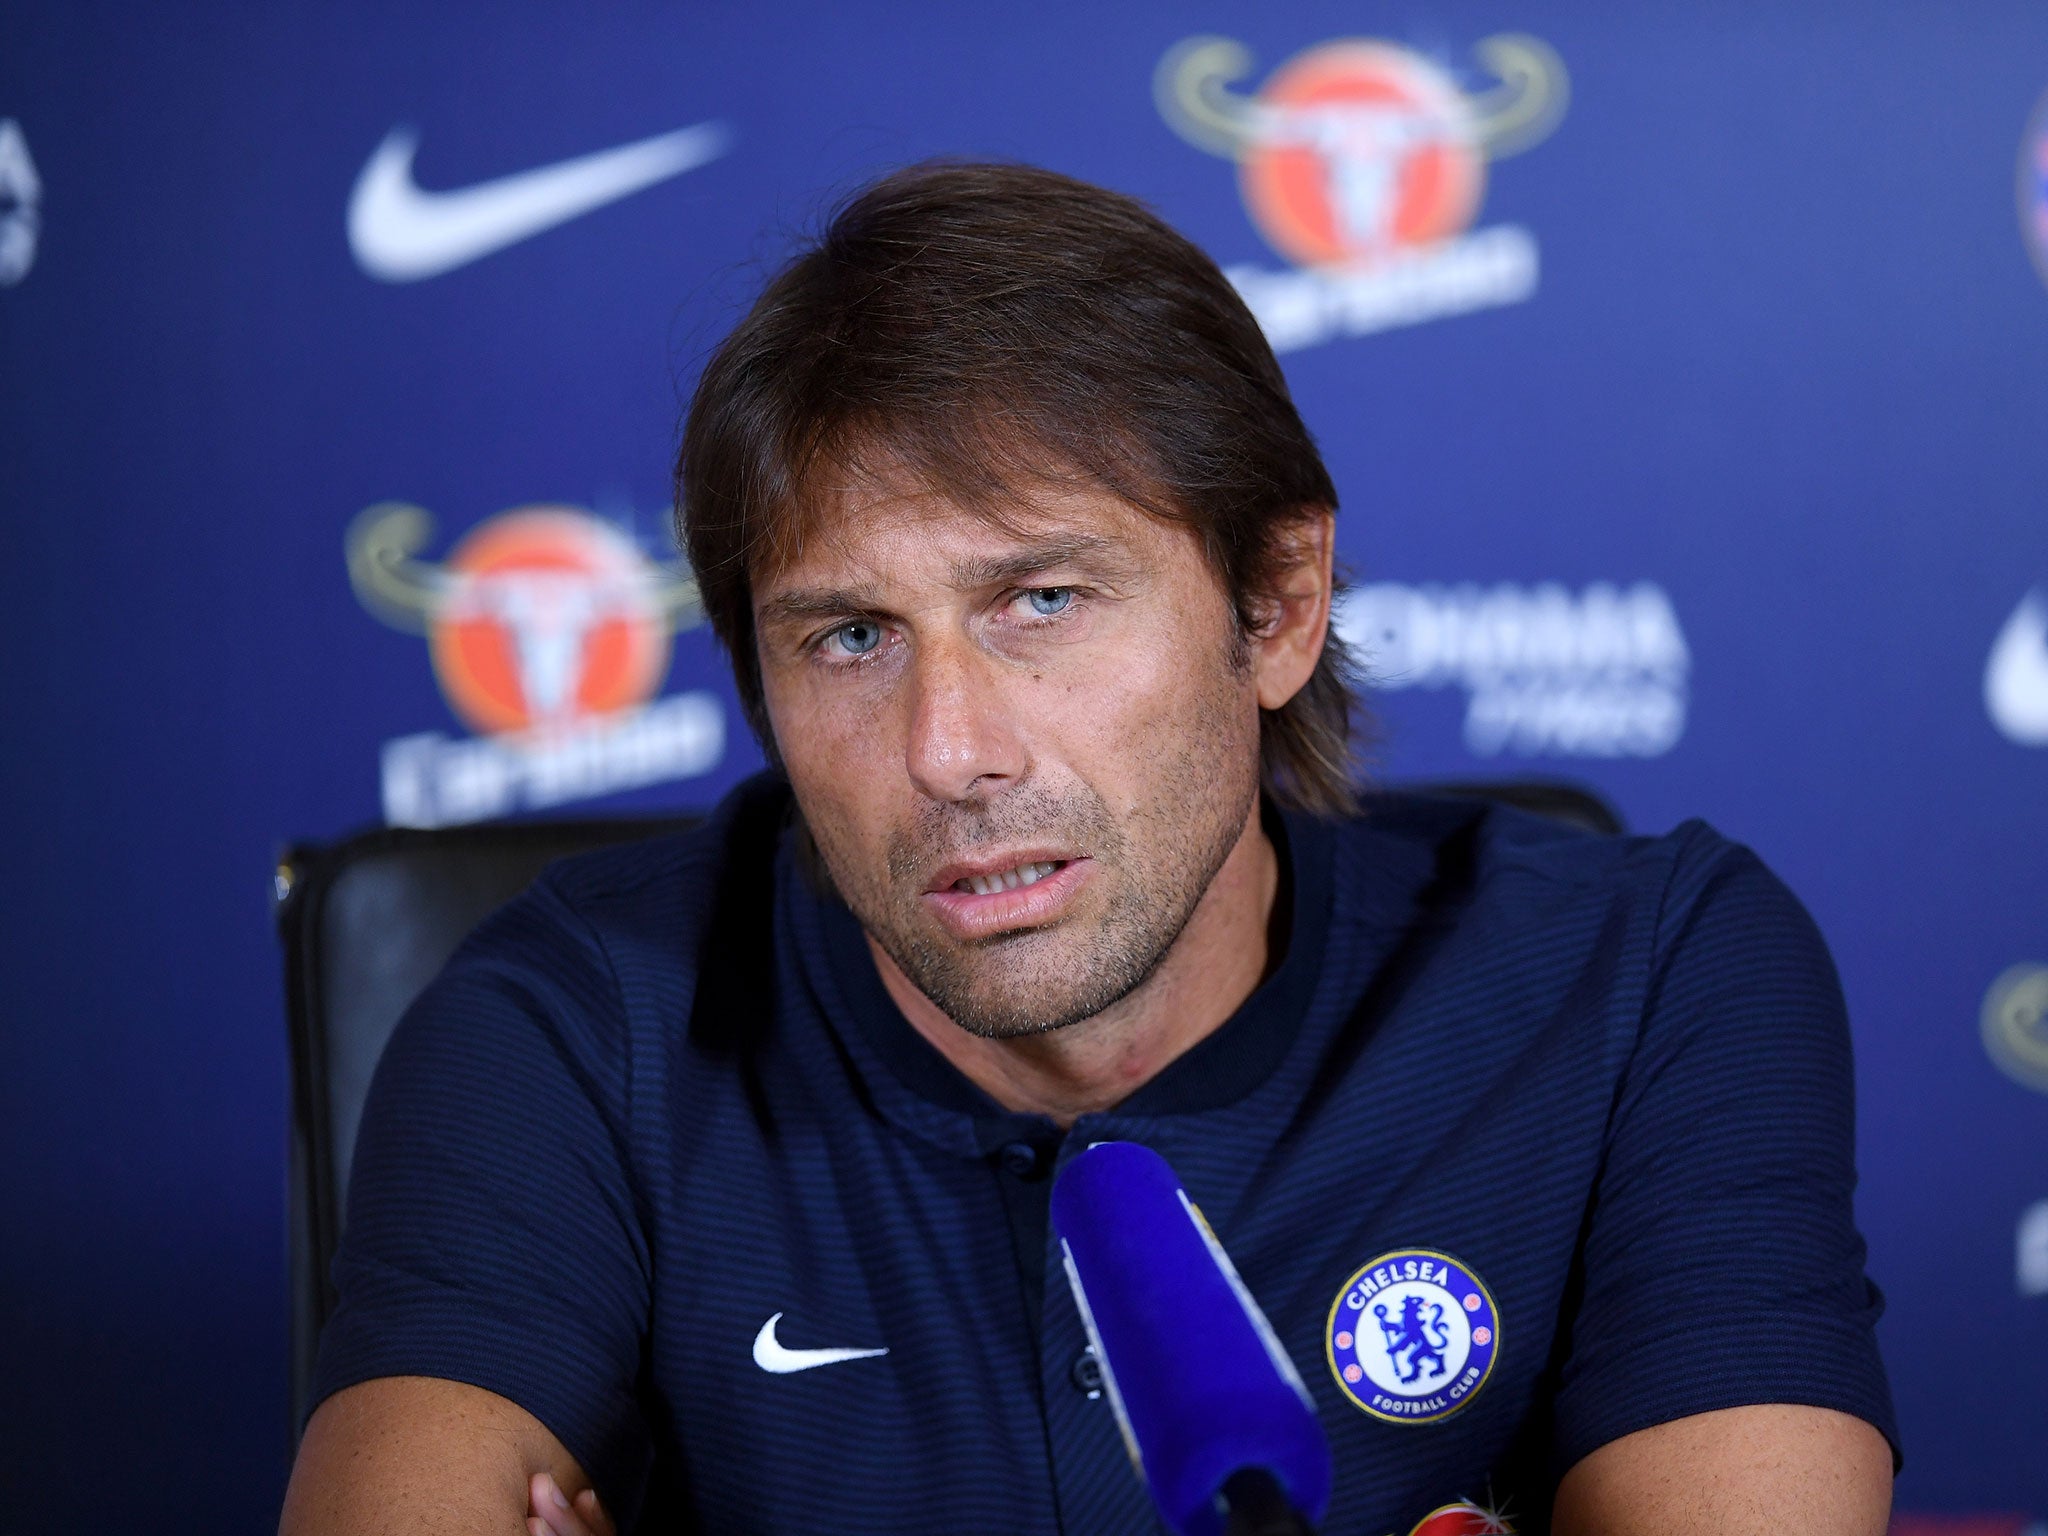 Antonio Conte laughed off Diego Costa's comments that he is being treated like a criminal